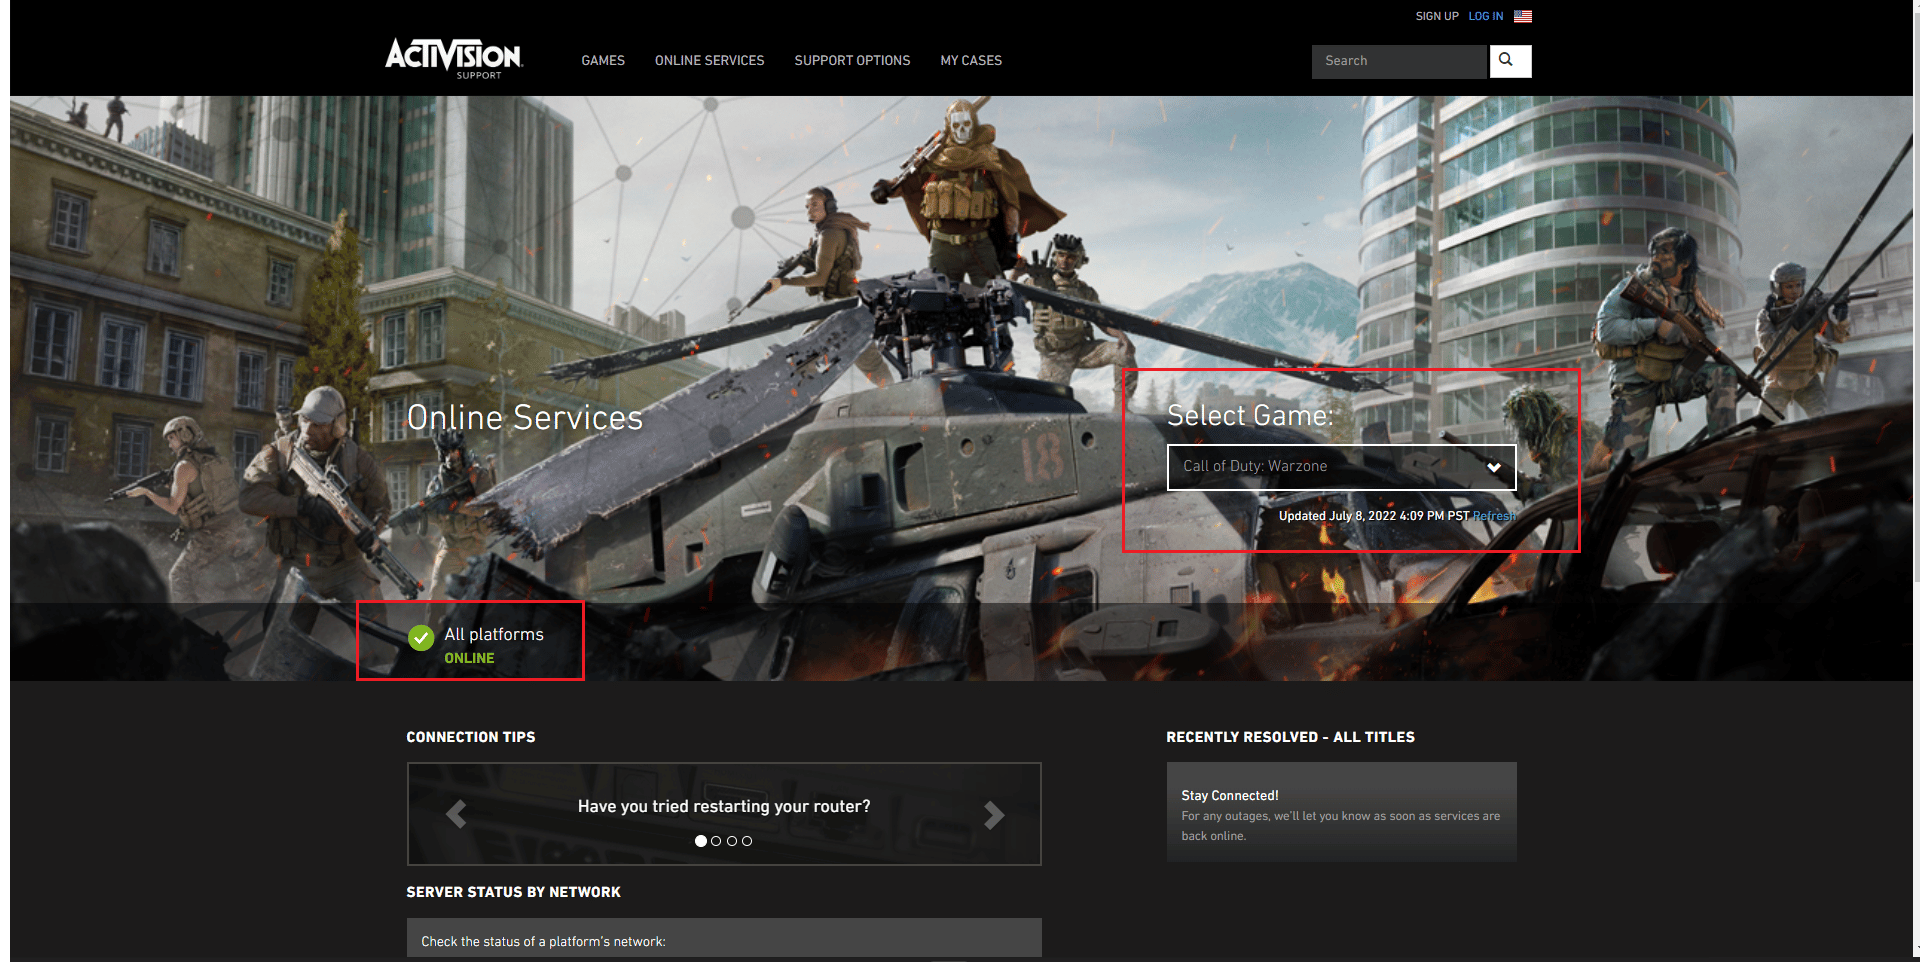 check call of duty warzone server status in activision support online services page